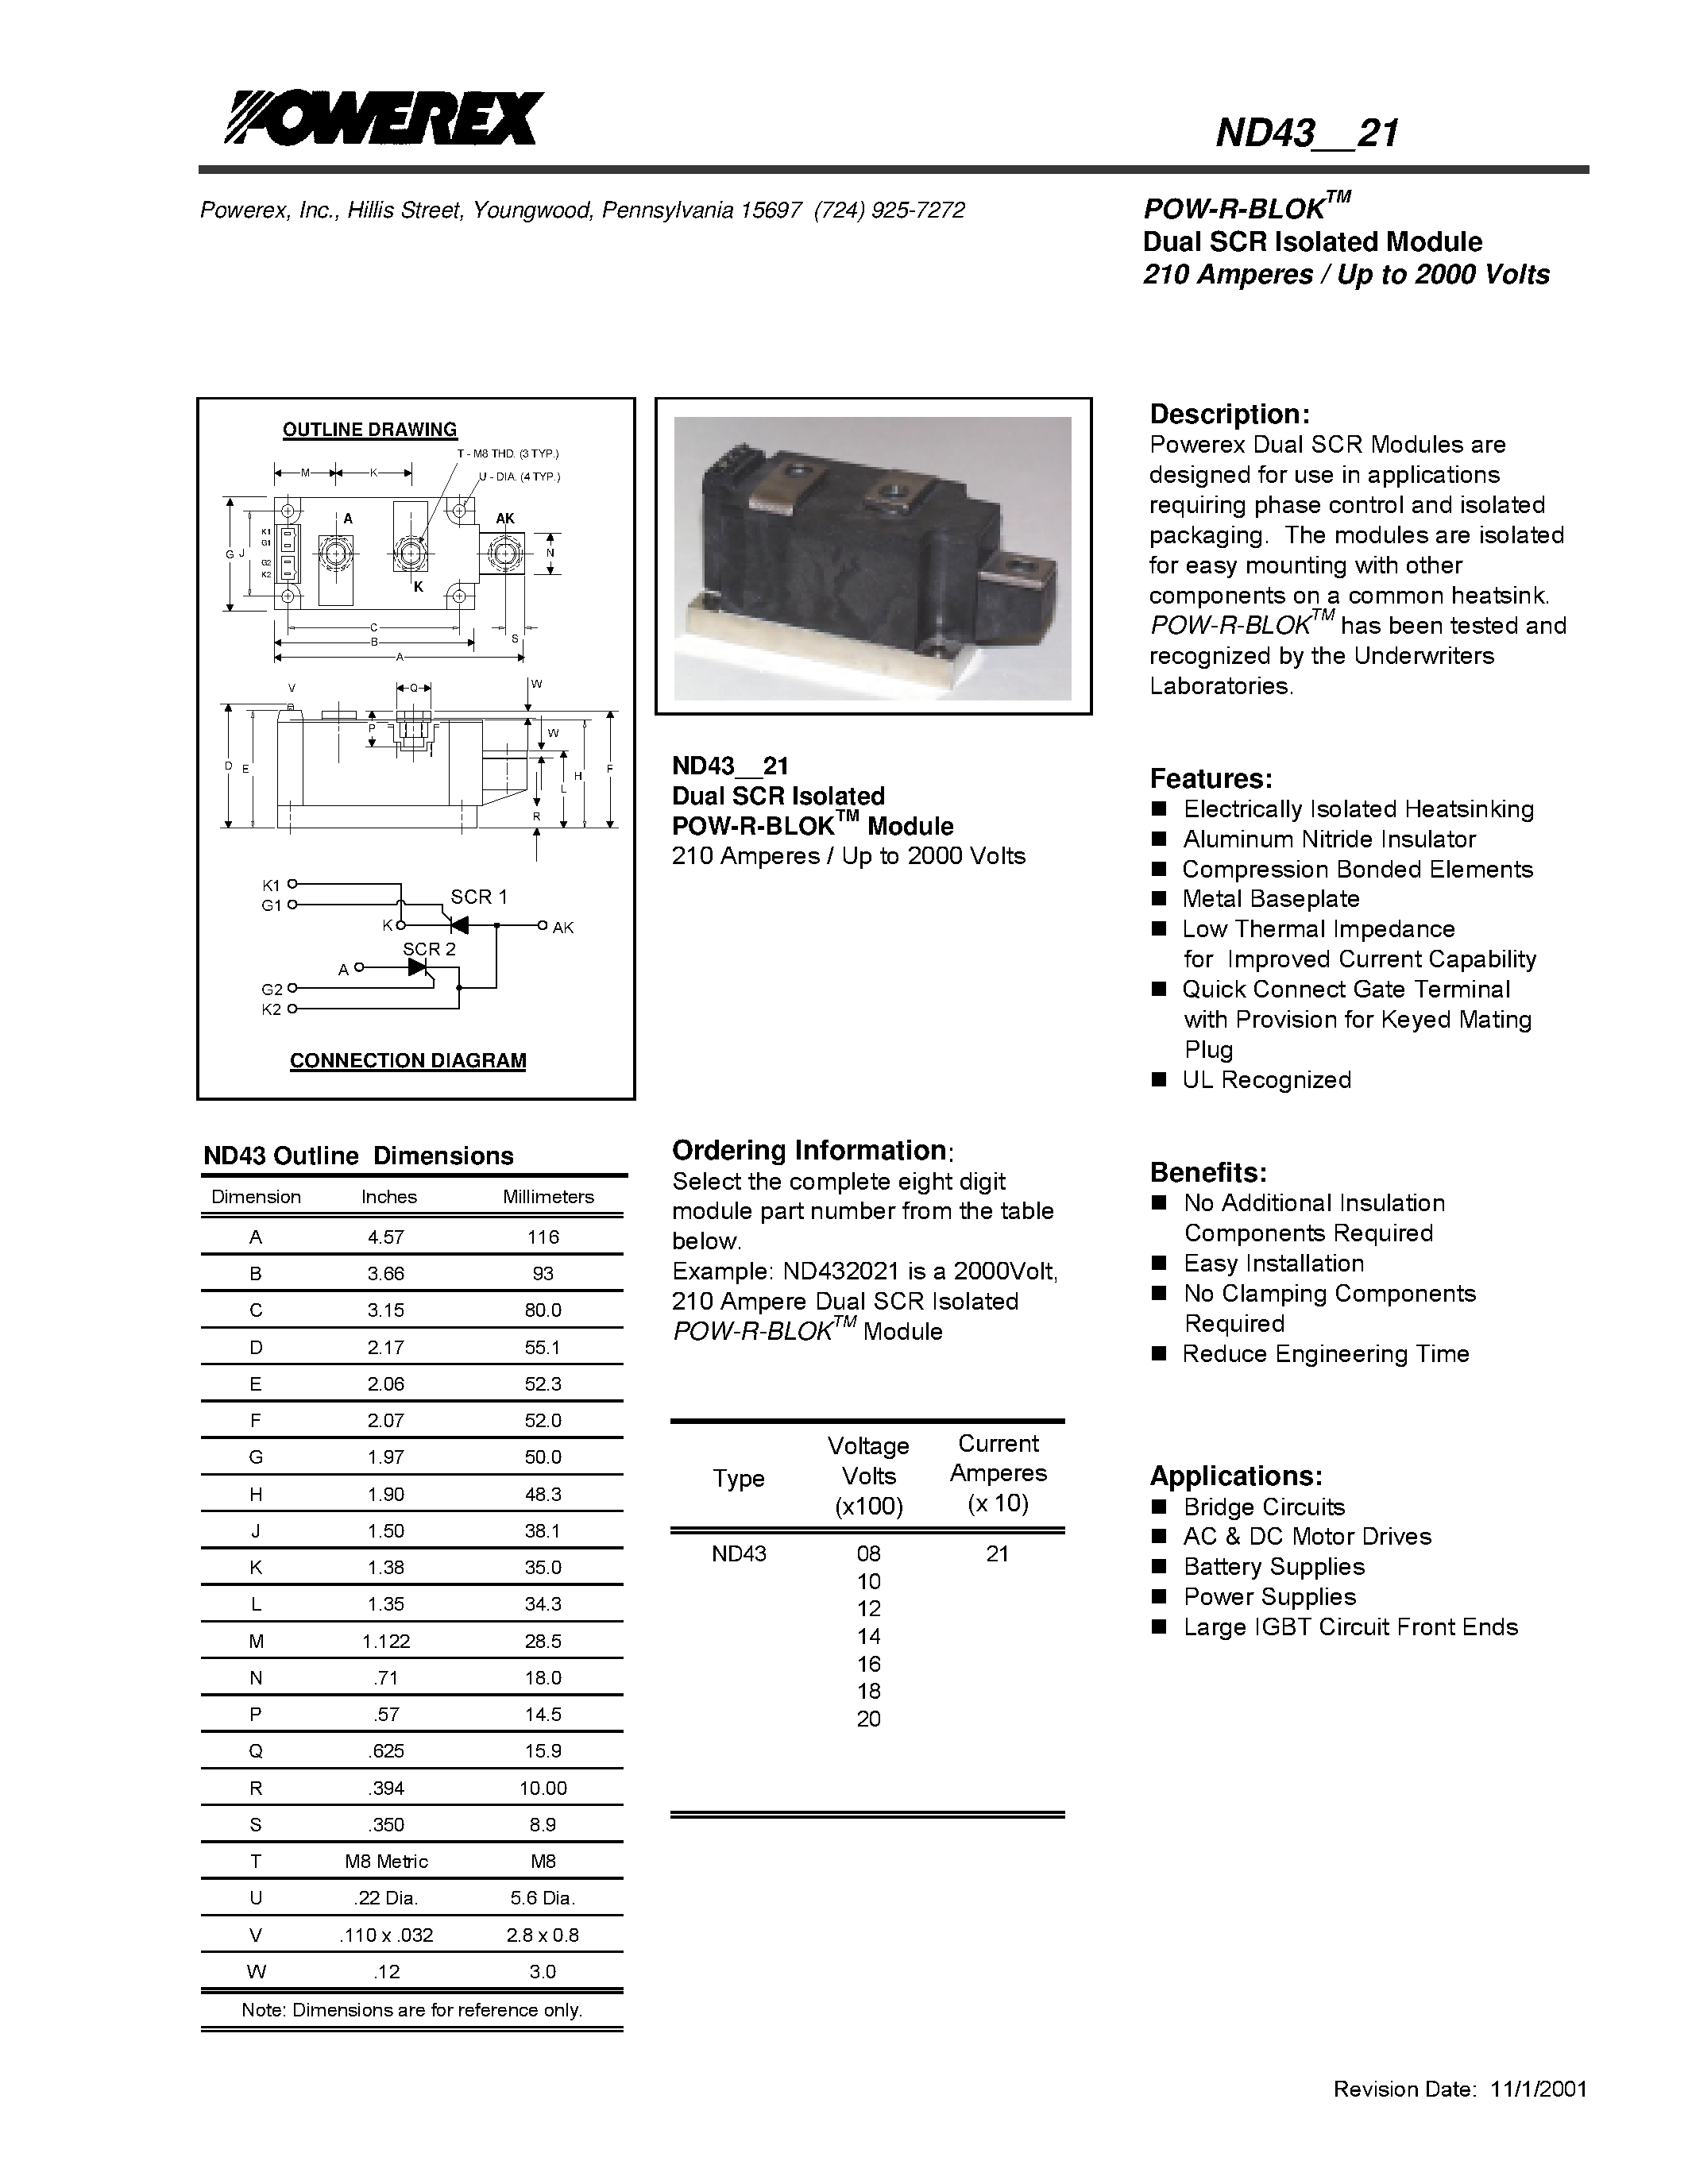 Datasheet ND431421 - POW-R-BLOK Dual SCR Isolated Module (210 Amperes / Up to 2000 Volts) page 1